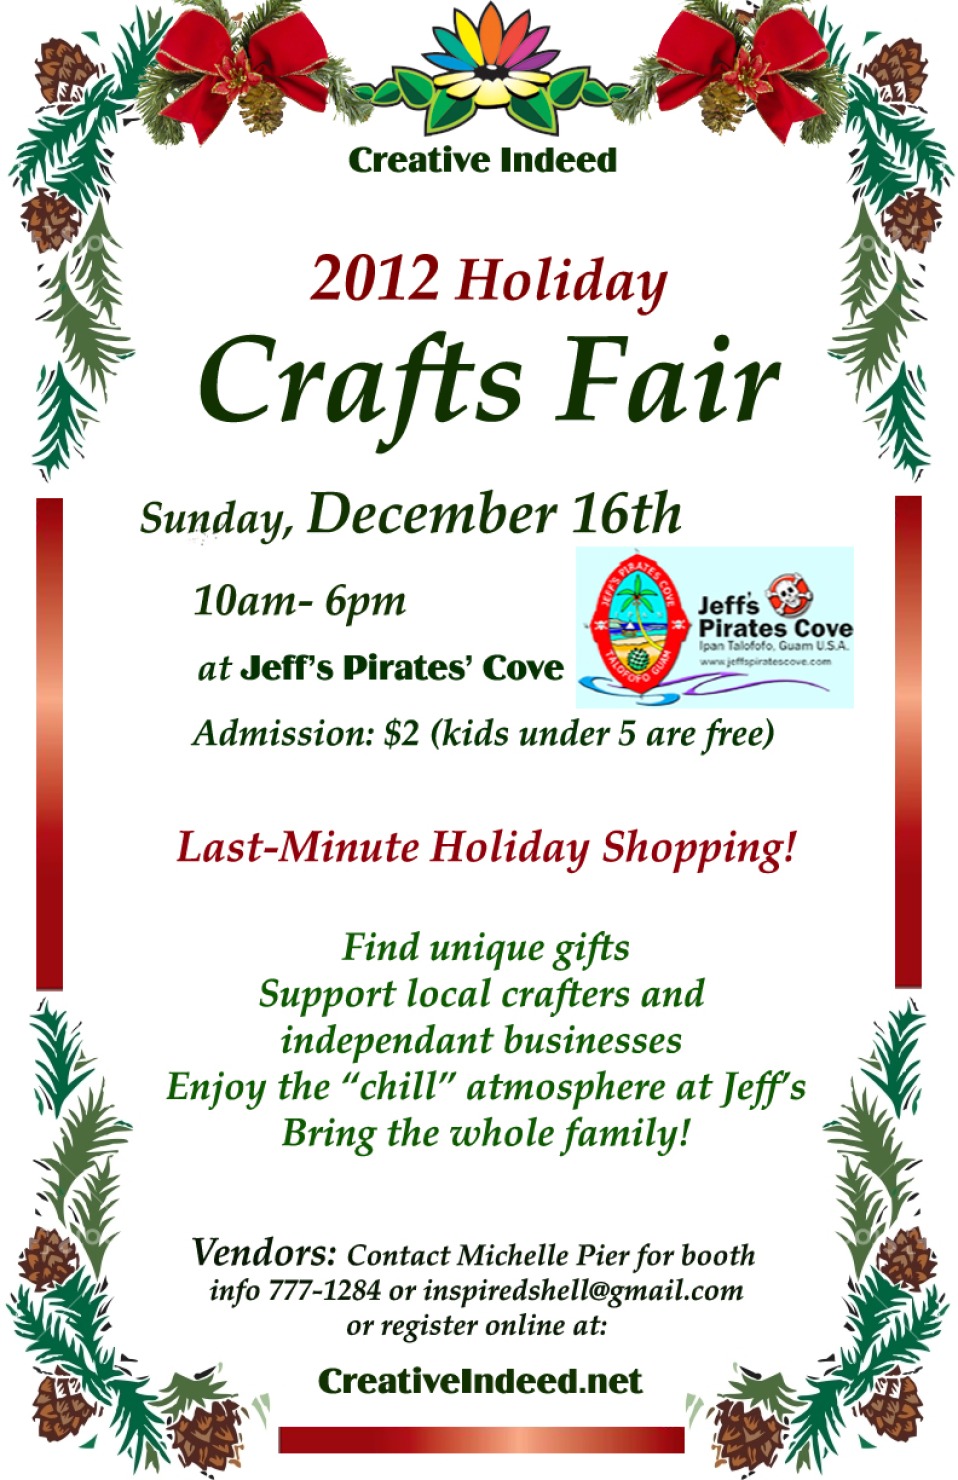 2012 Holiday Craft Fair at Jeff’s Pirates’ Cove on Guam